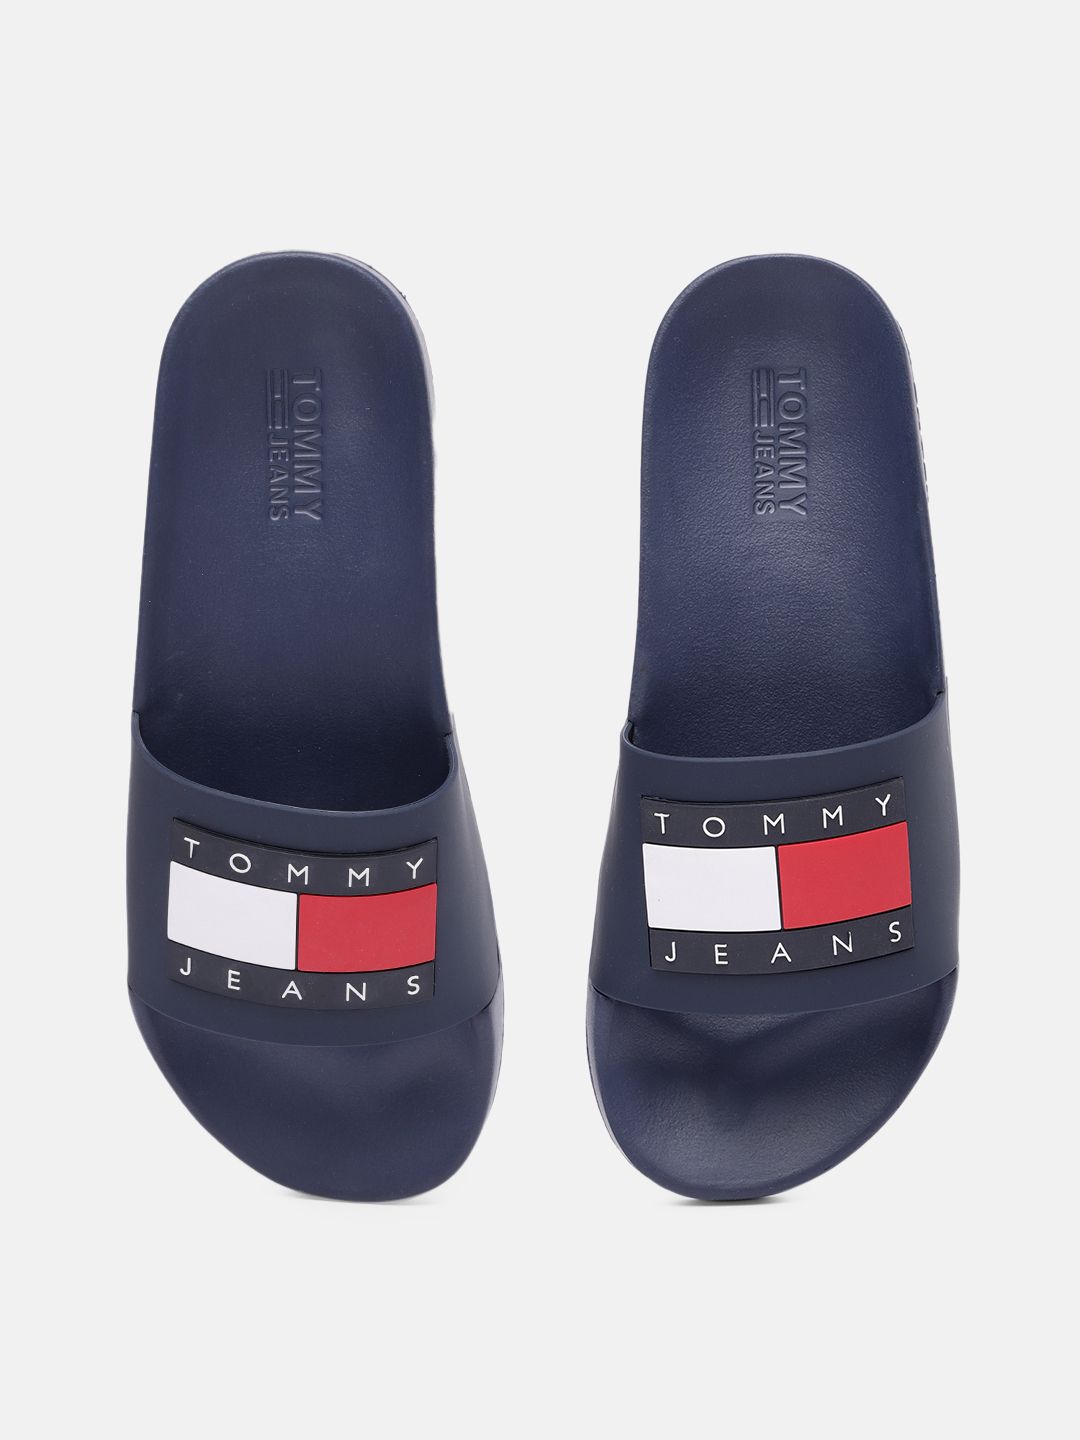 Tommy Hilfiger Jeans Women Twilight Navy Blue Brand Logo Applique Flag Pool Sliders Price in India